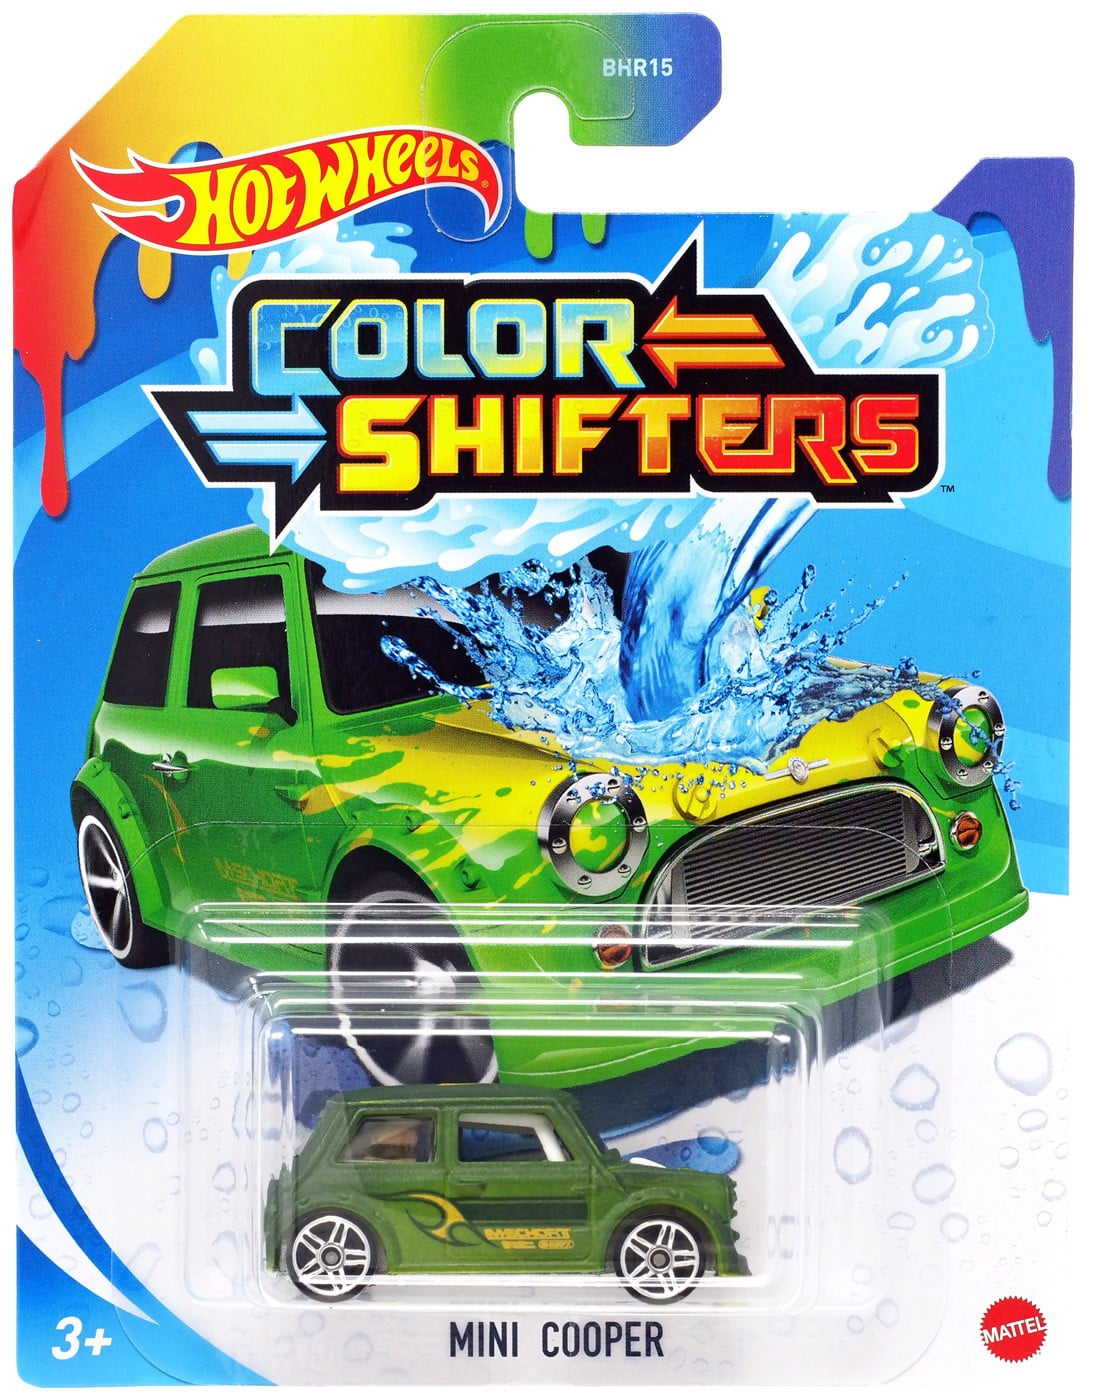 Buzzkill-Combined Postage HOT WHEELS Colour Shifters